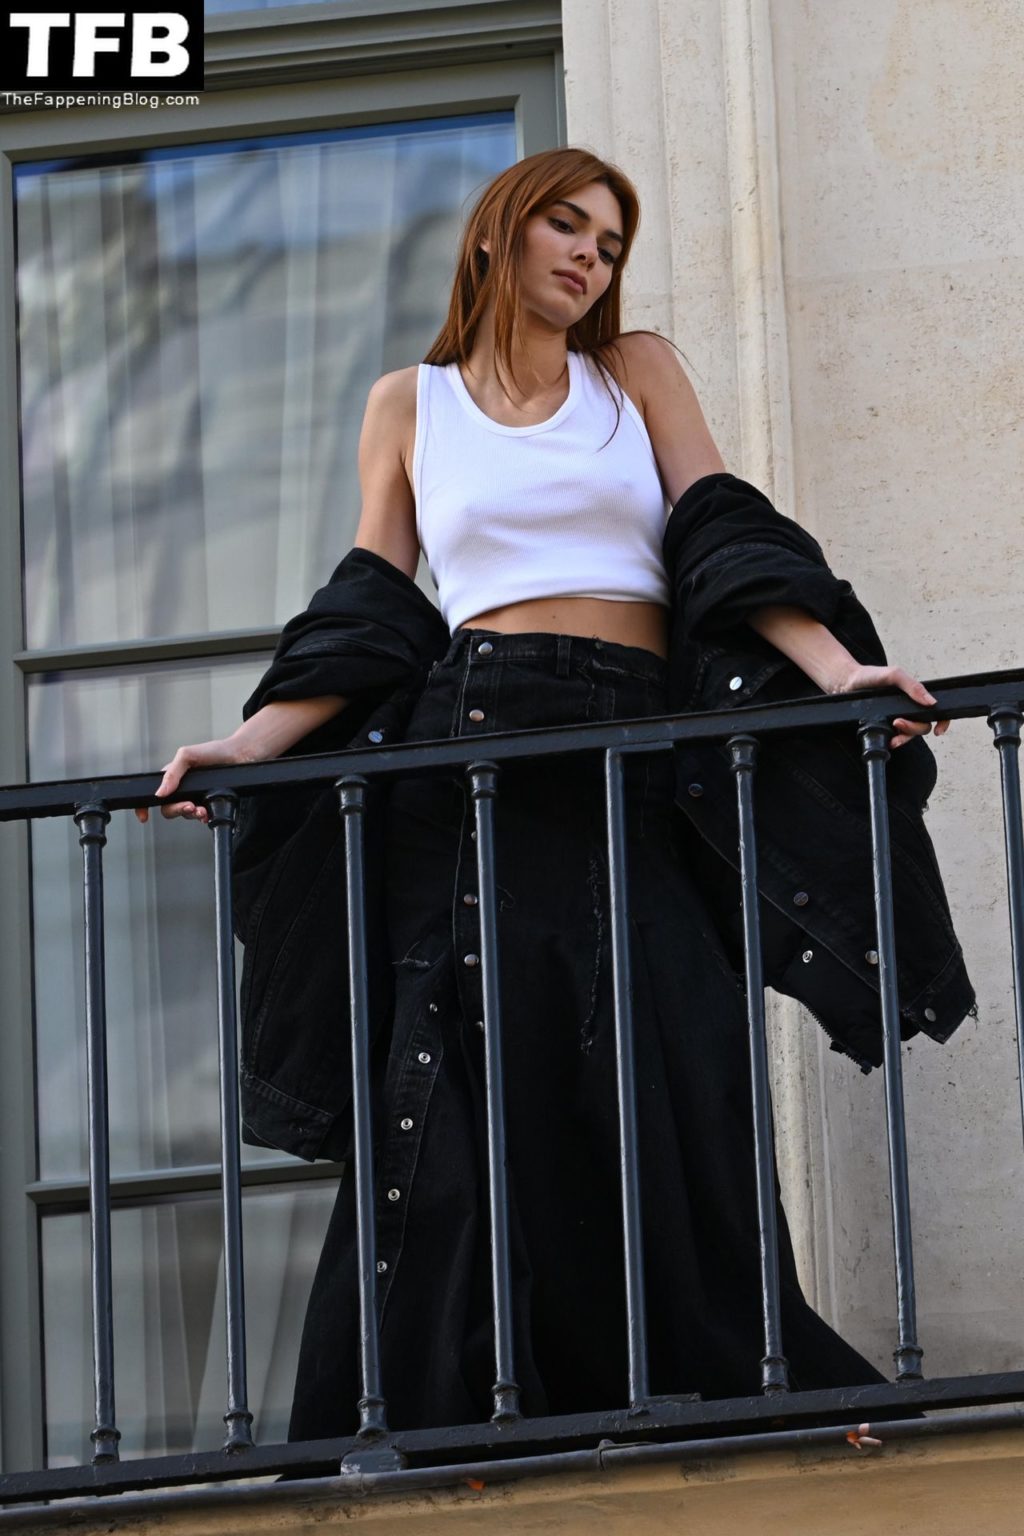 Kendall Jenner Braless The Fappening Blog 28 1024x1536 - Braless Kendall Jenner Poses in Paris (141 Photos)